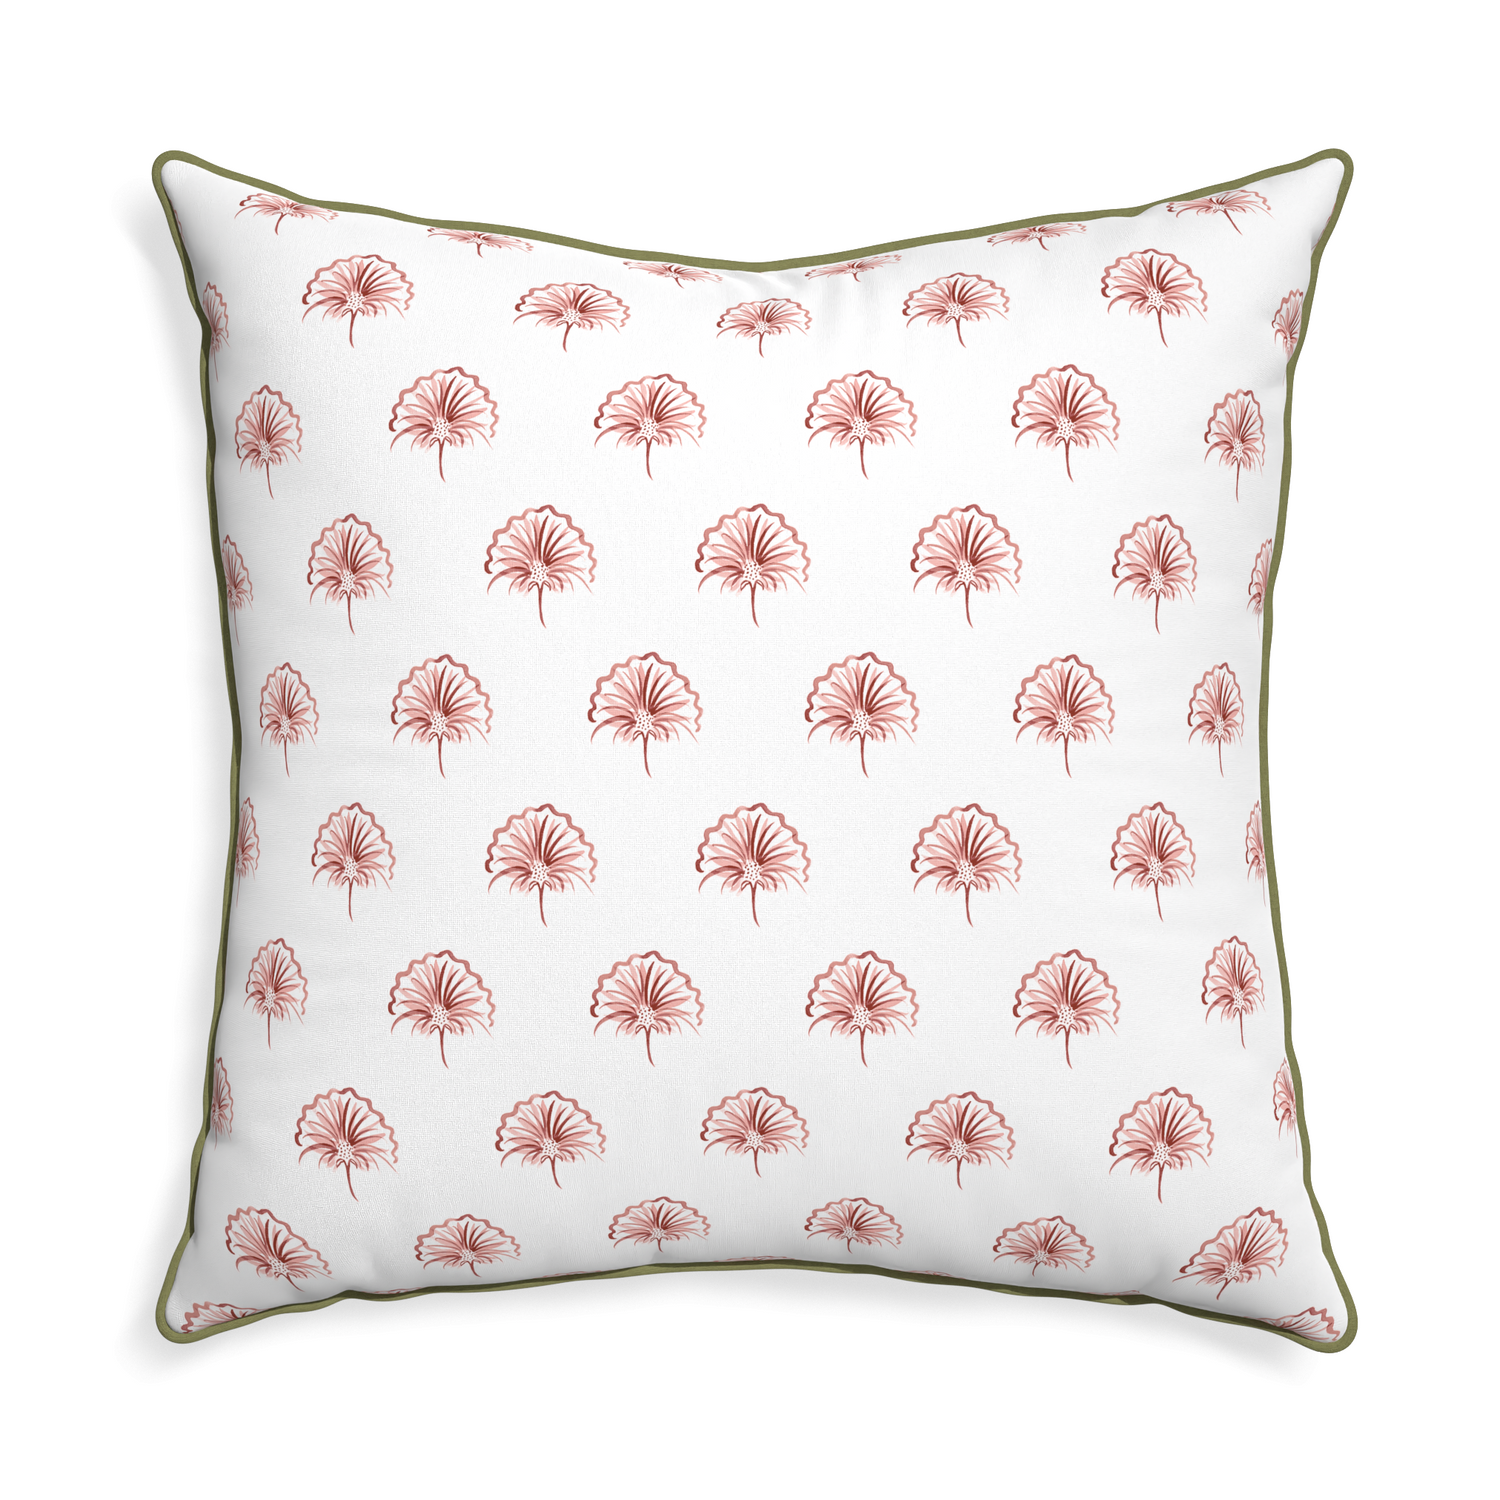 Euro-sham penelope rose custom pillow with moss piping on white background